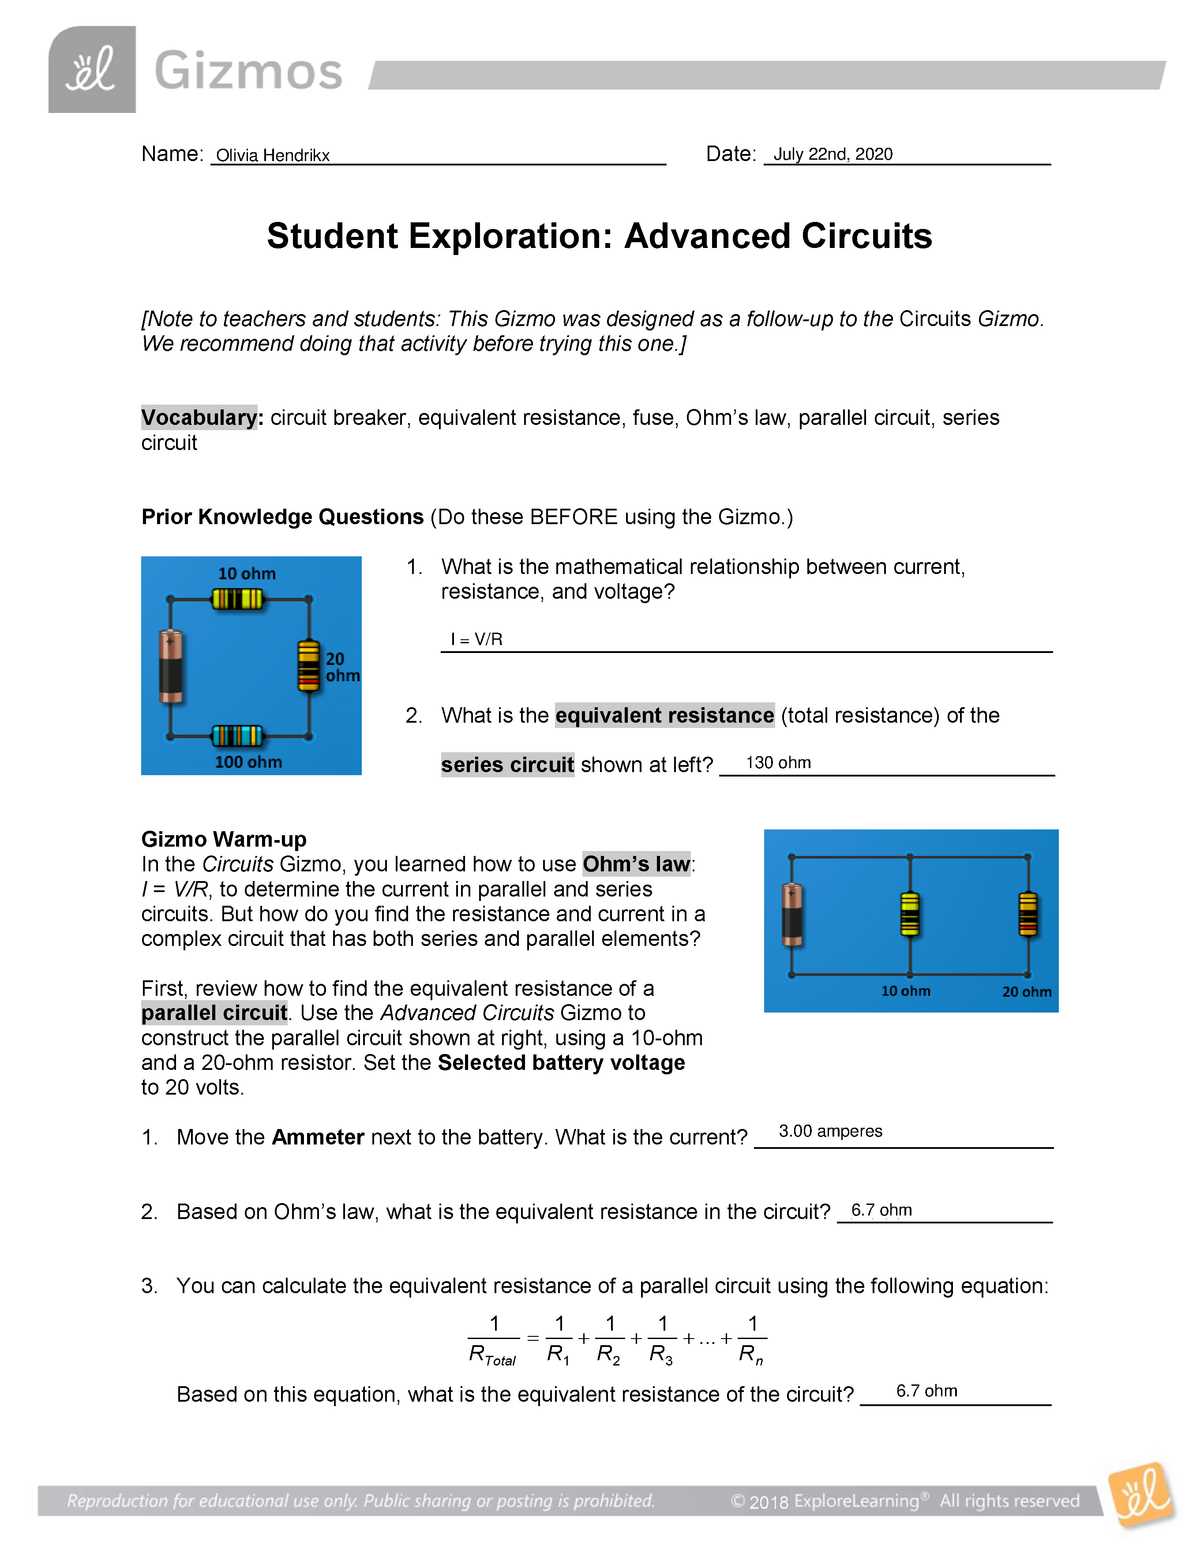 Exploring Key Components in Advanced Circuits Gizmo